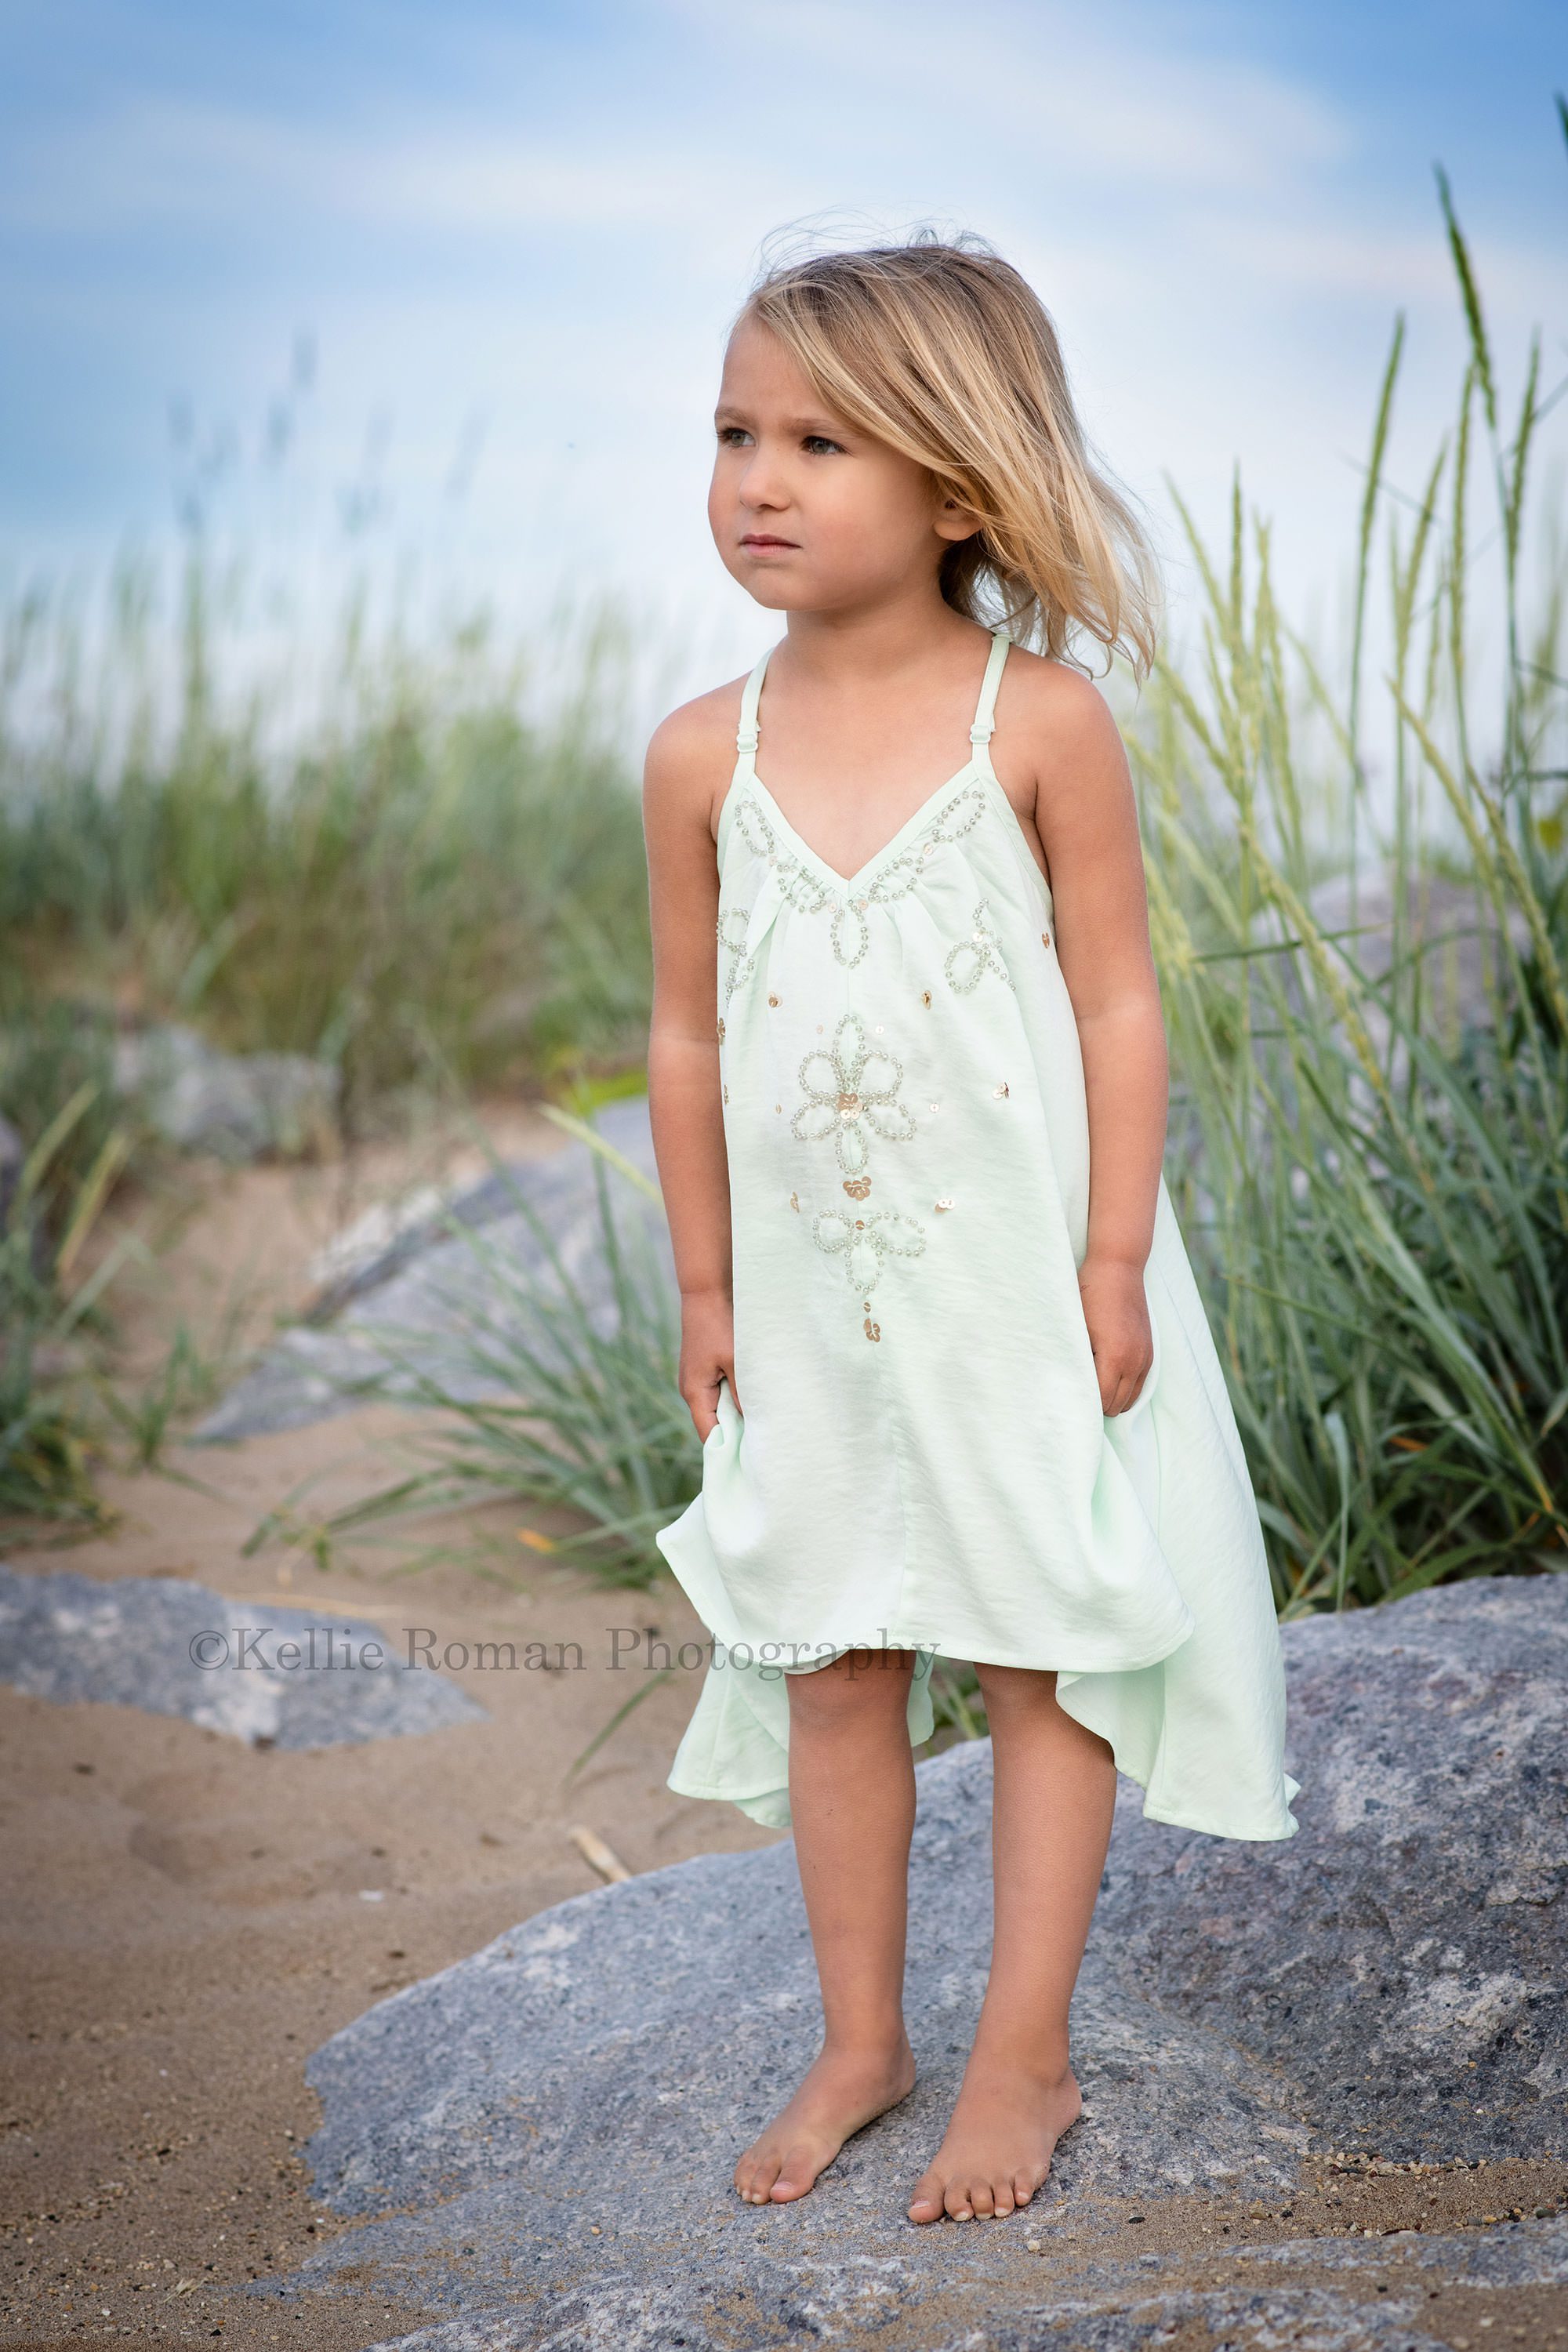 beach colors a three year old girl with blonde hair standing on a large rock in the sand on a beach she is looking off to the side and has an aqua dress on with beads she's being photographed on a milwaukee beach